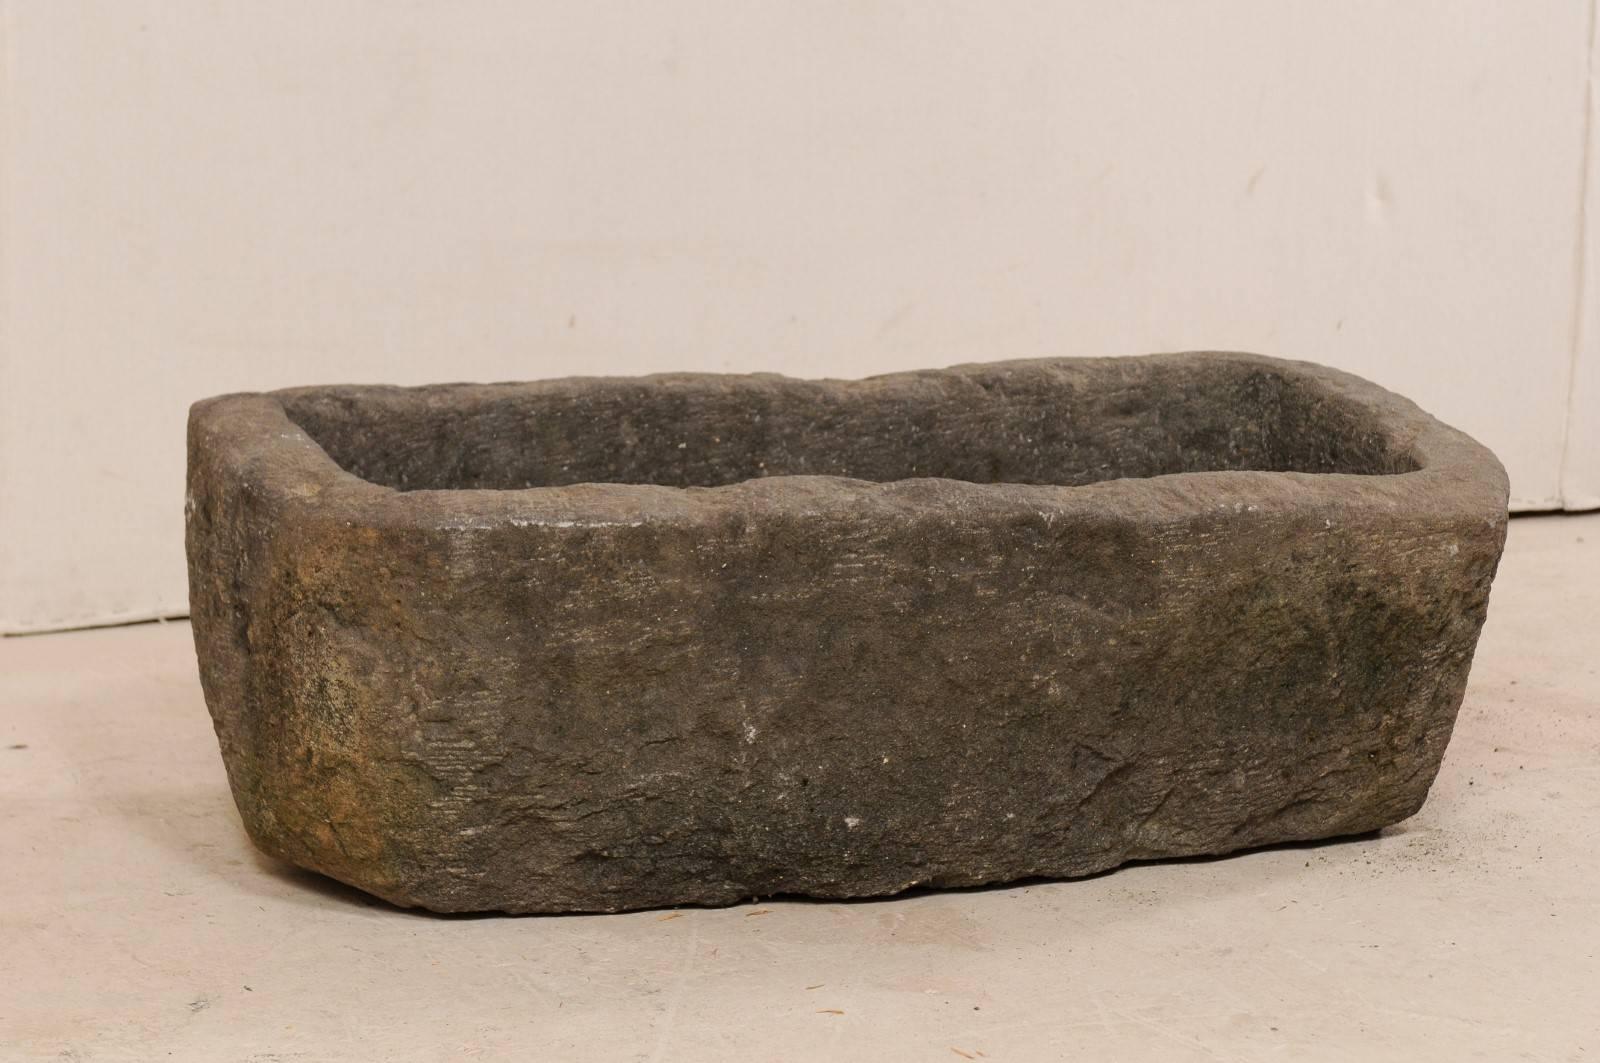 A stone trough from the turn of the 19th and 20th centuries. This antique stone trough from Indonesia is rectangular in shape and has been carved out of a single piece of stone. It is both beautiful and rustic, simplistic in design. A delightful